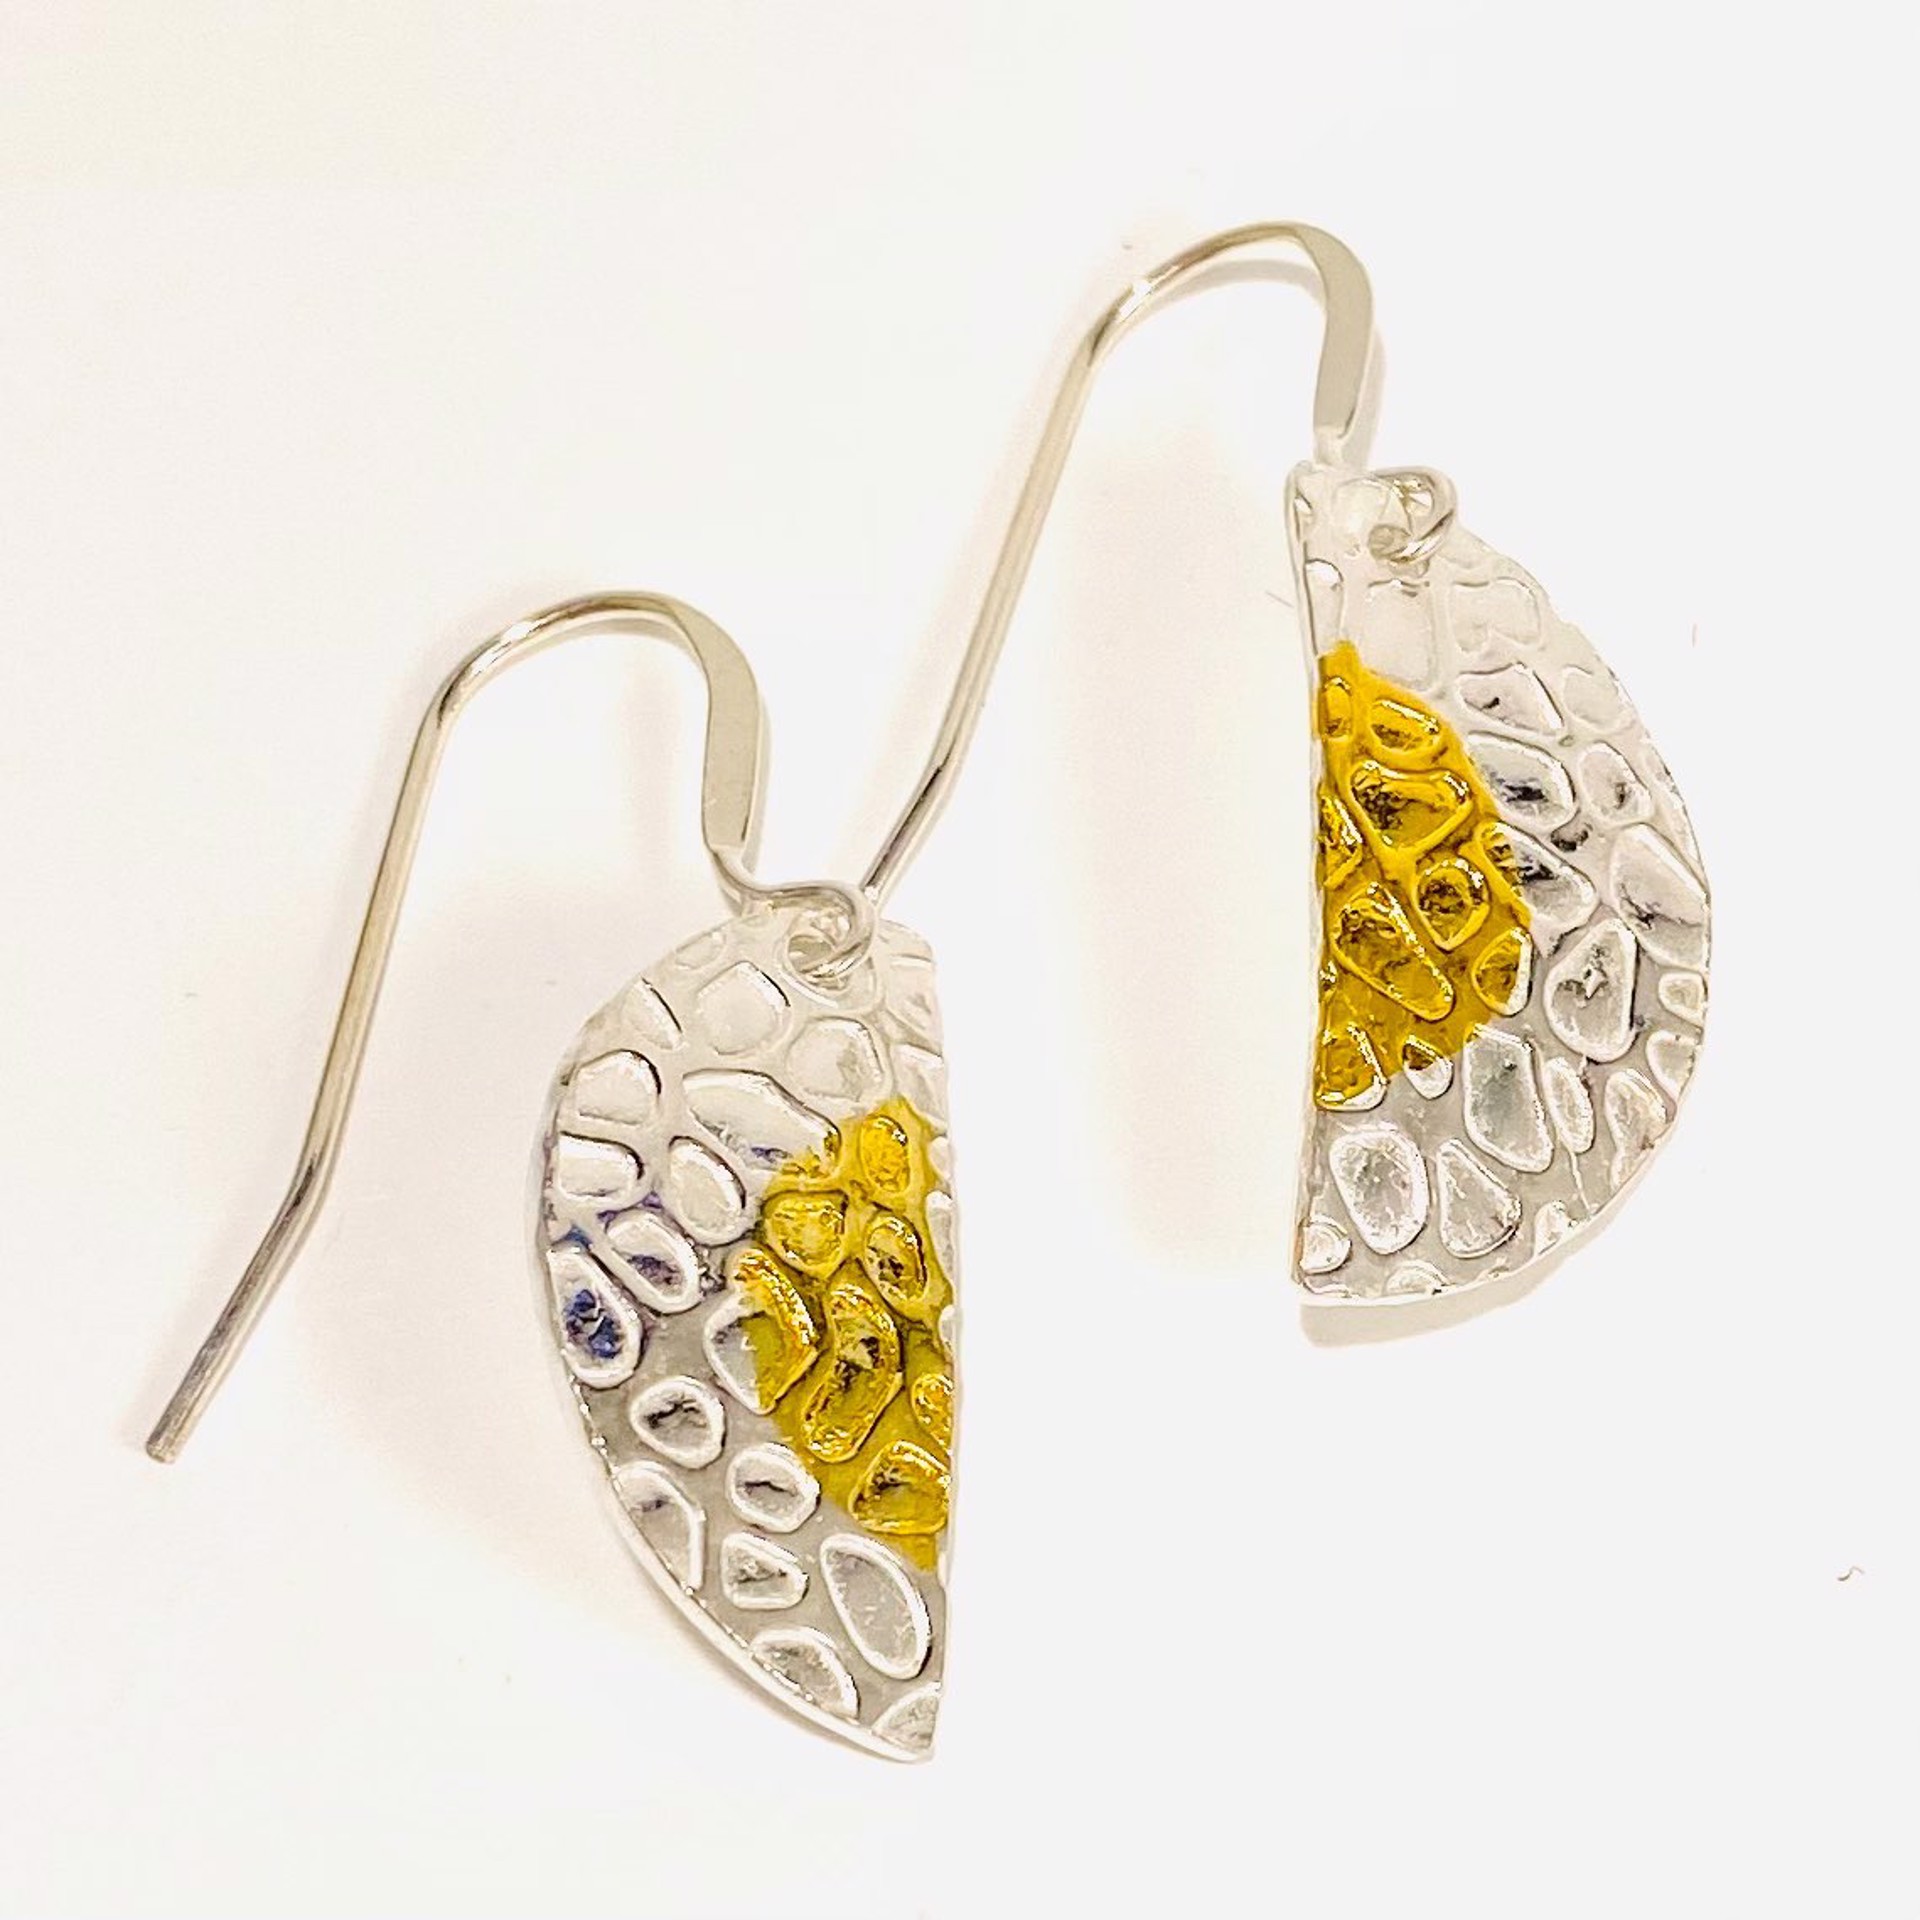 Keum-boo Oxidized Fine Silver and Gold Half Circle Earrings by Karen Hakim